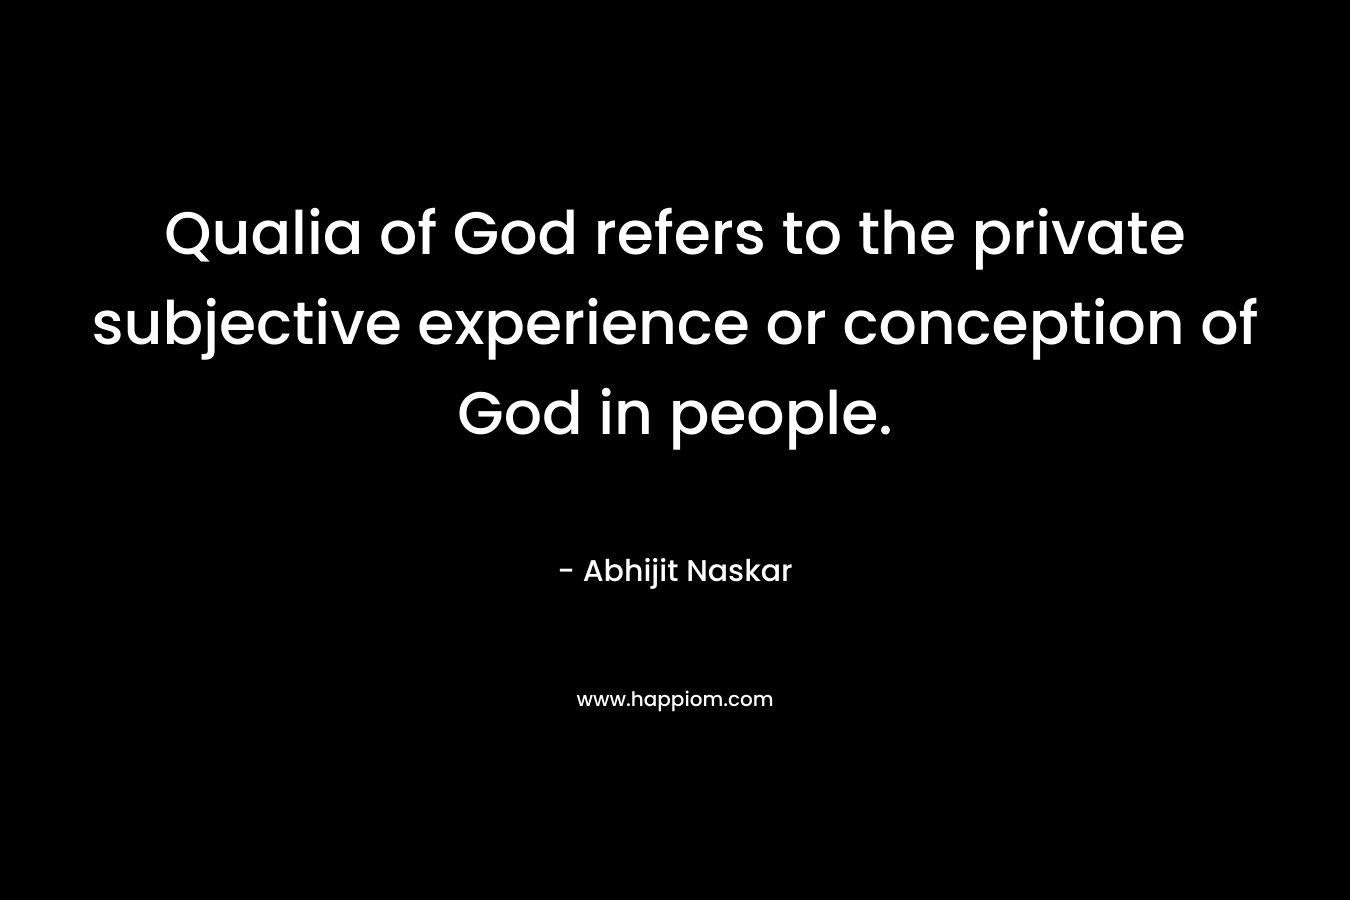 Qualia of God refers to the private subjective experience or conception of God in people. – Abhijit Naskar